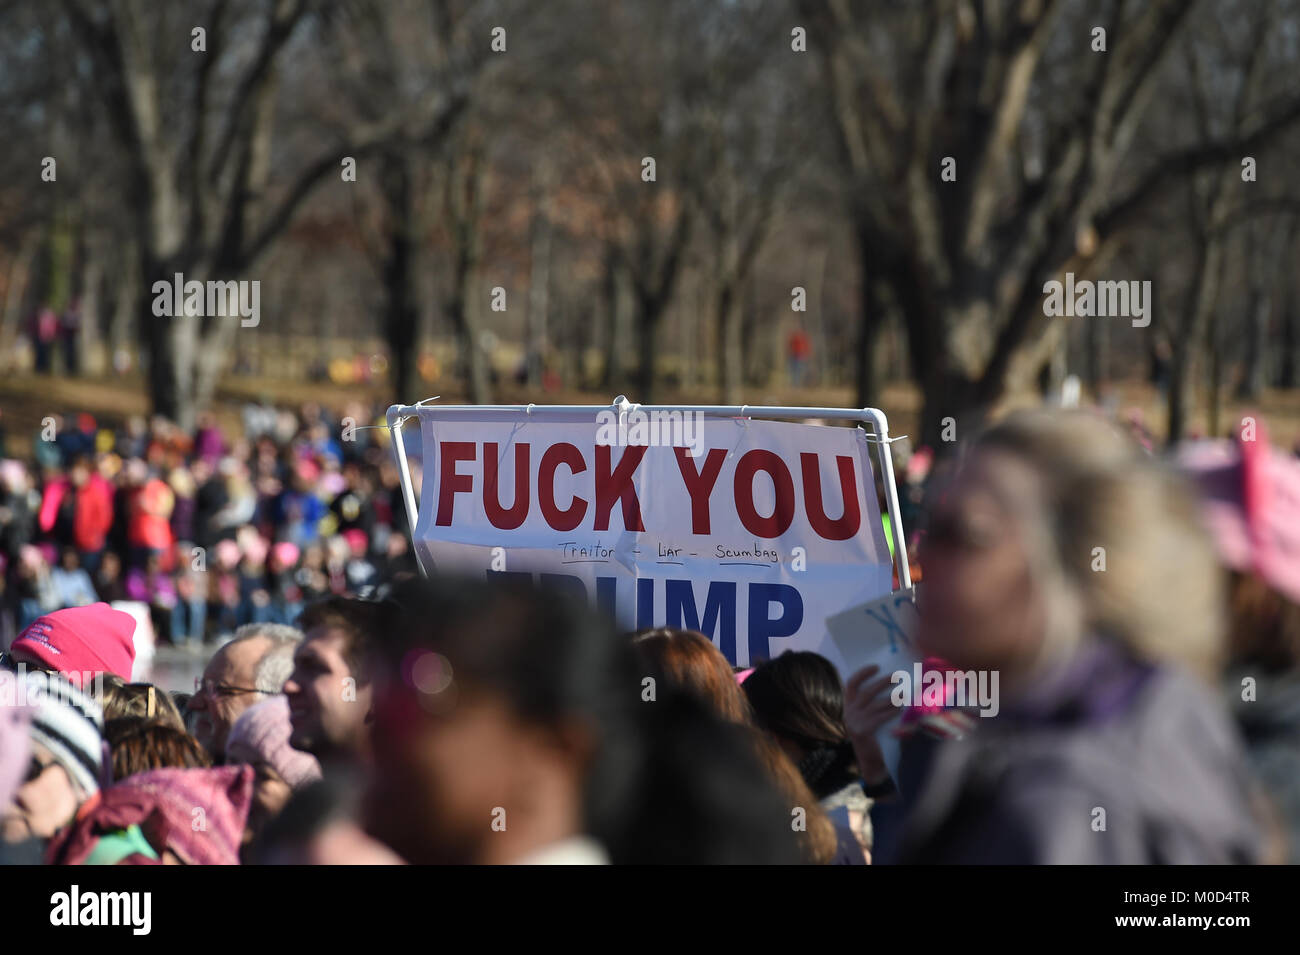 Washington DC, USA. 20th Jan, 2018. Jan. 20th Jan, 2018. A marcher shows their discontent for Trump in a sign during the Women's March around Lincoln Memorial in Washington, DC, on Jan. 20, 2018 in Washington Credit: csm/Alamy Live News Credit: Cal Sport Media/Alamy Live News Stock Photo